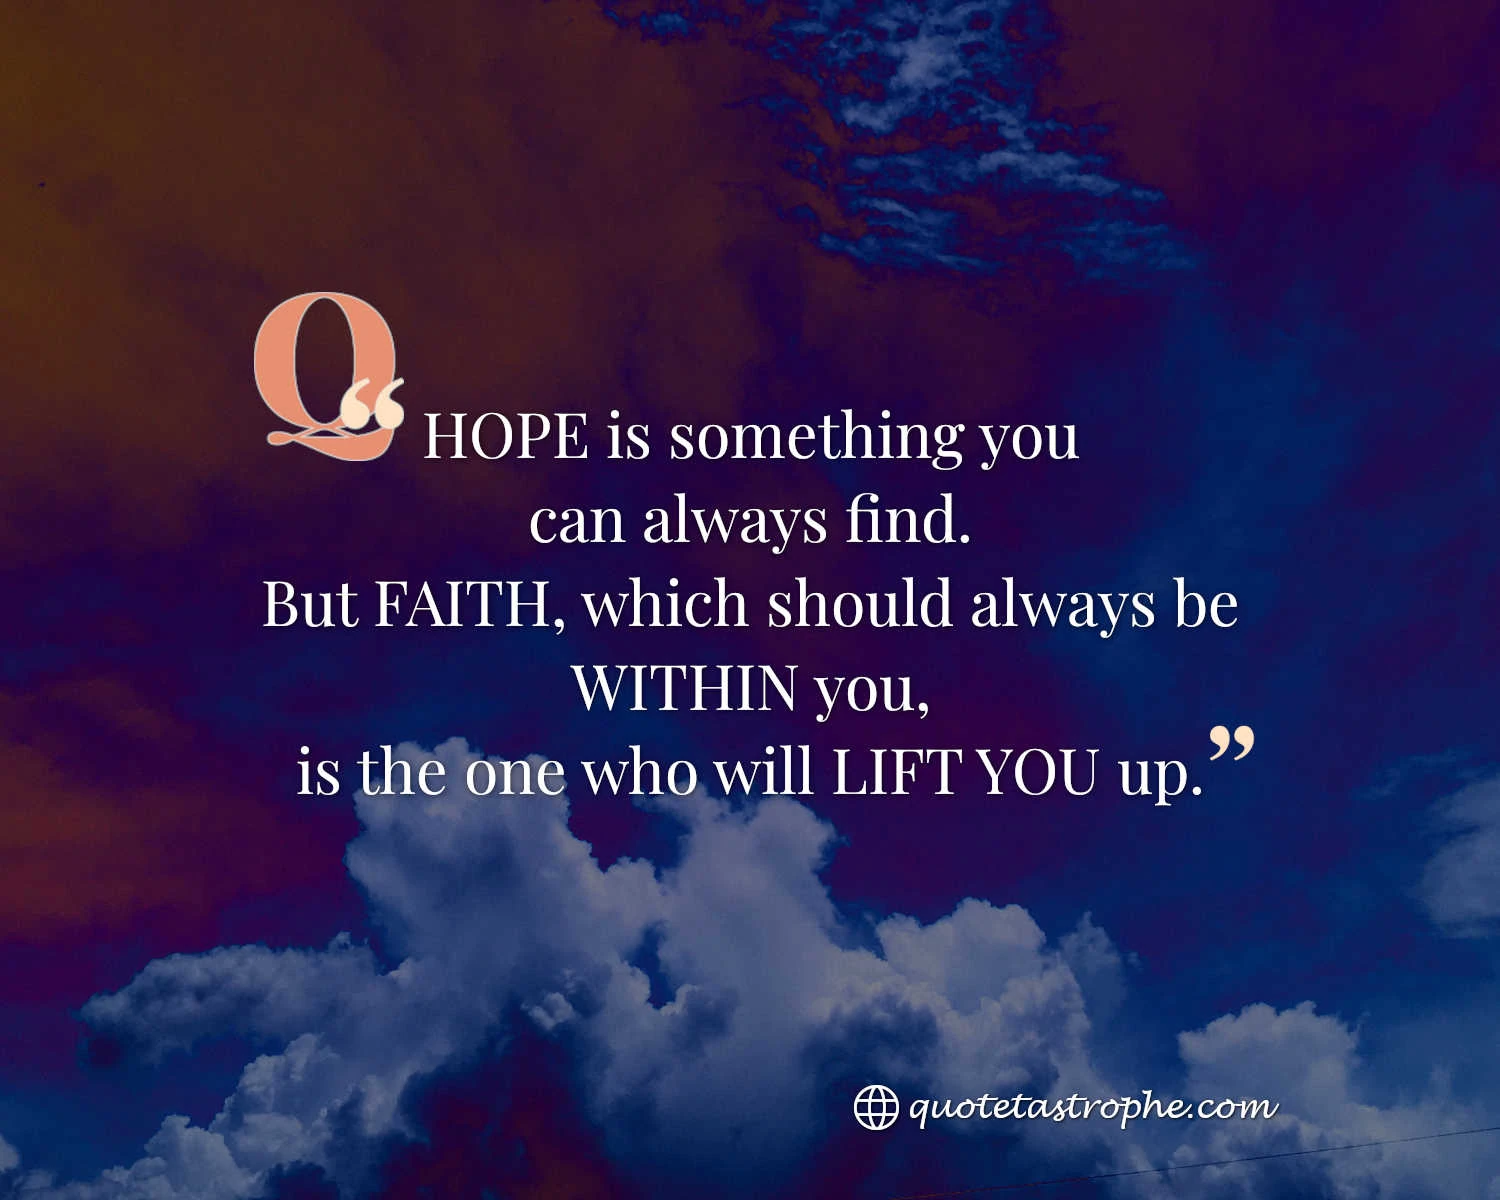 Hope is Something You Can Always Find